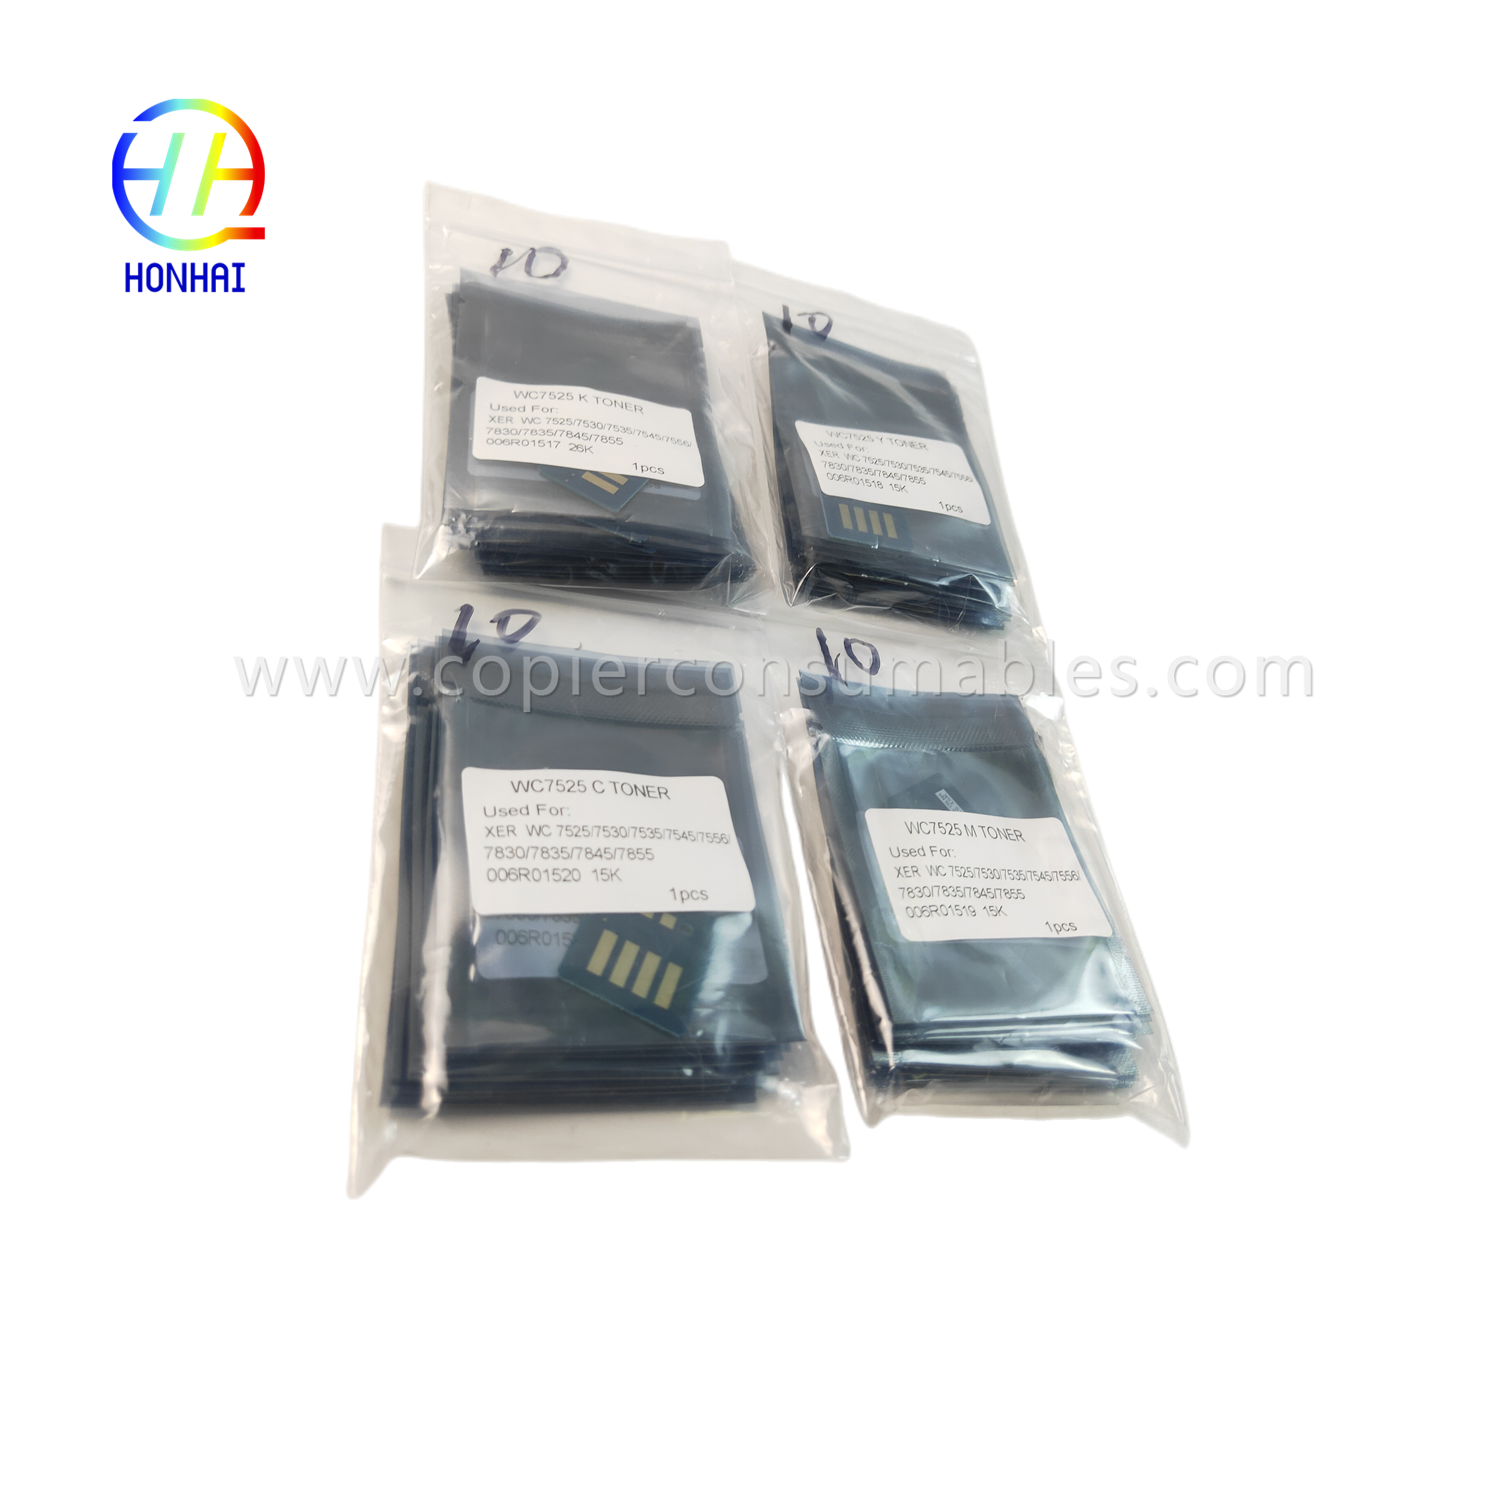 Toner Chip (set) for Xerox 7525 7530 7535 7830 7835 7845 7855 006R01517 006R01518 006R01519 006R01520 Chip  (2)_副本